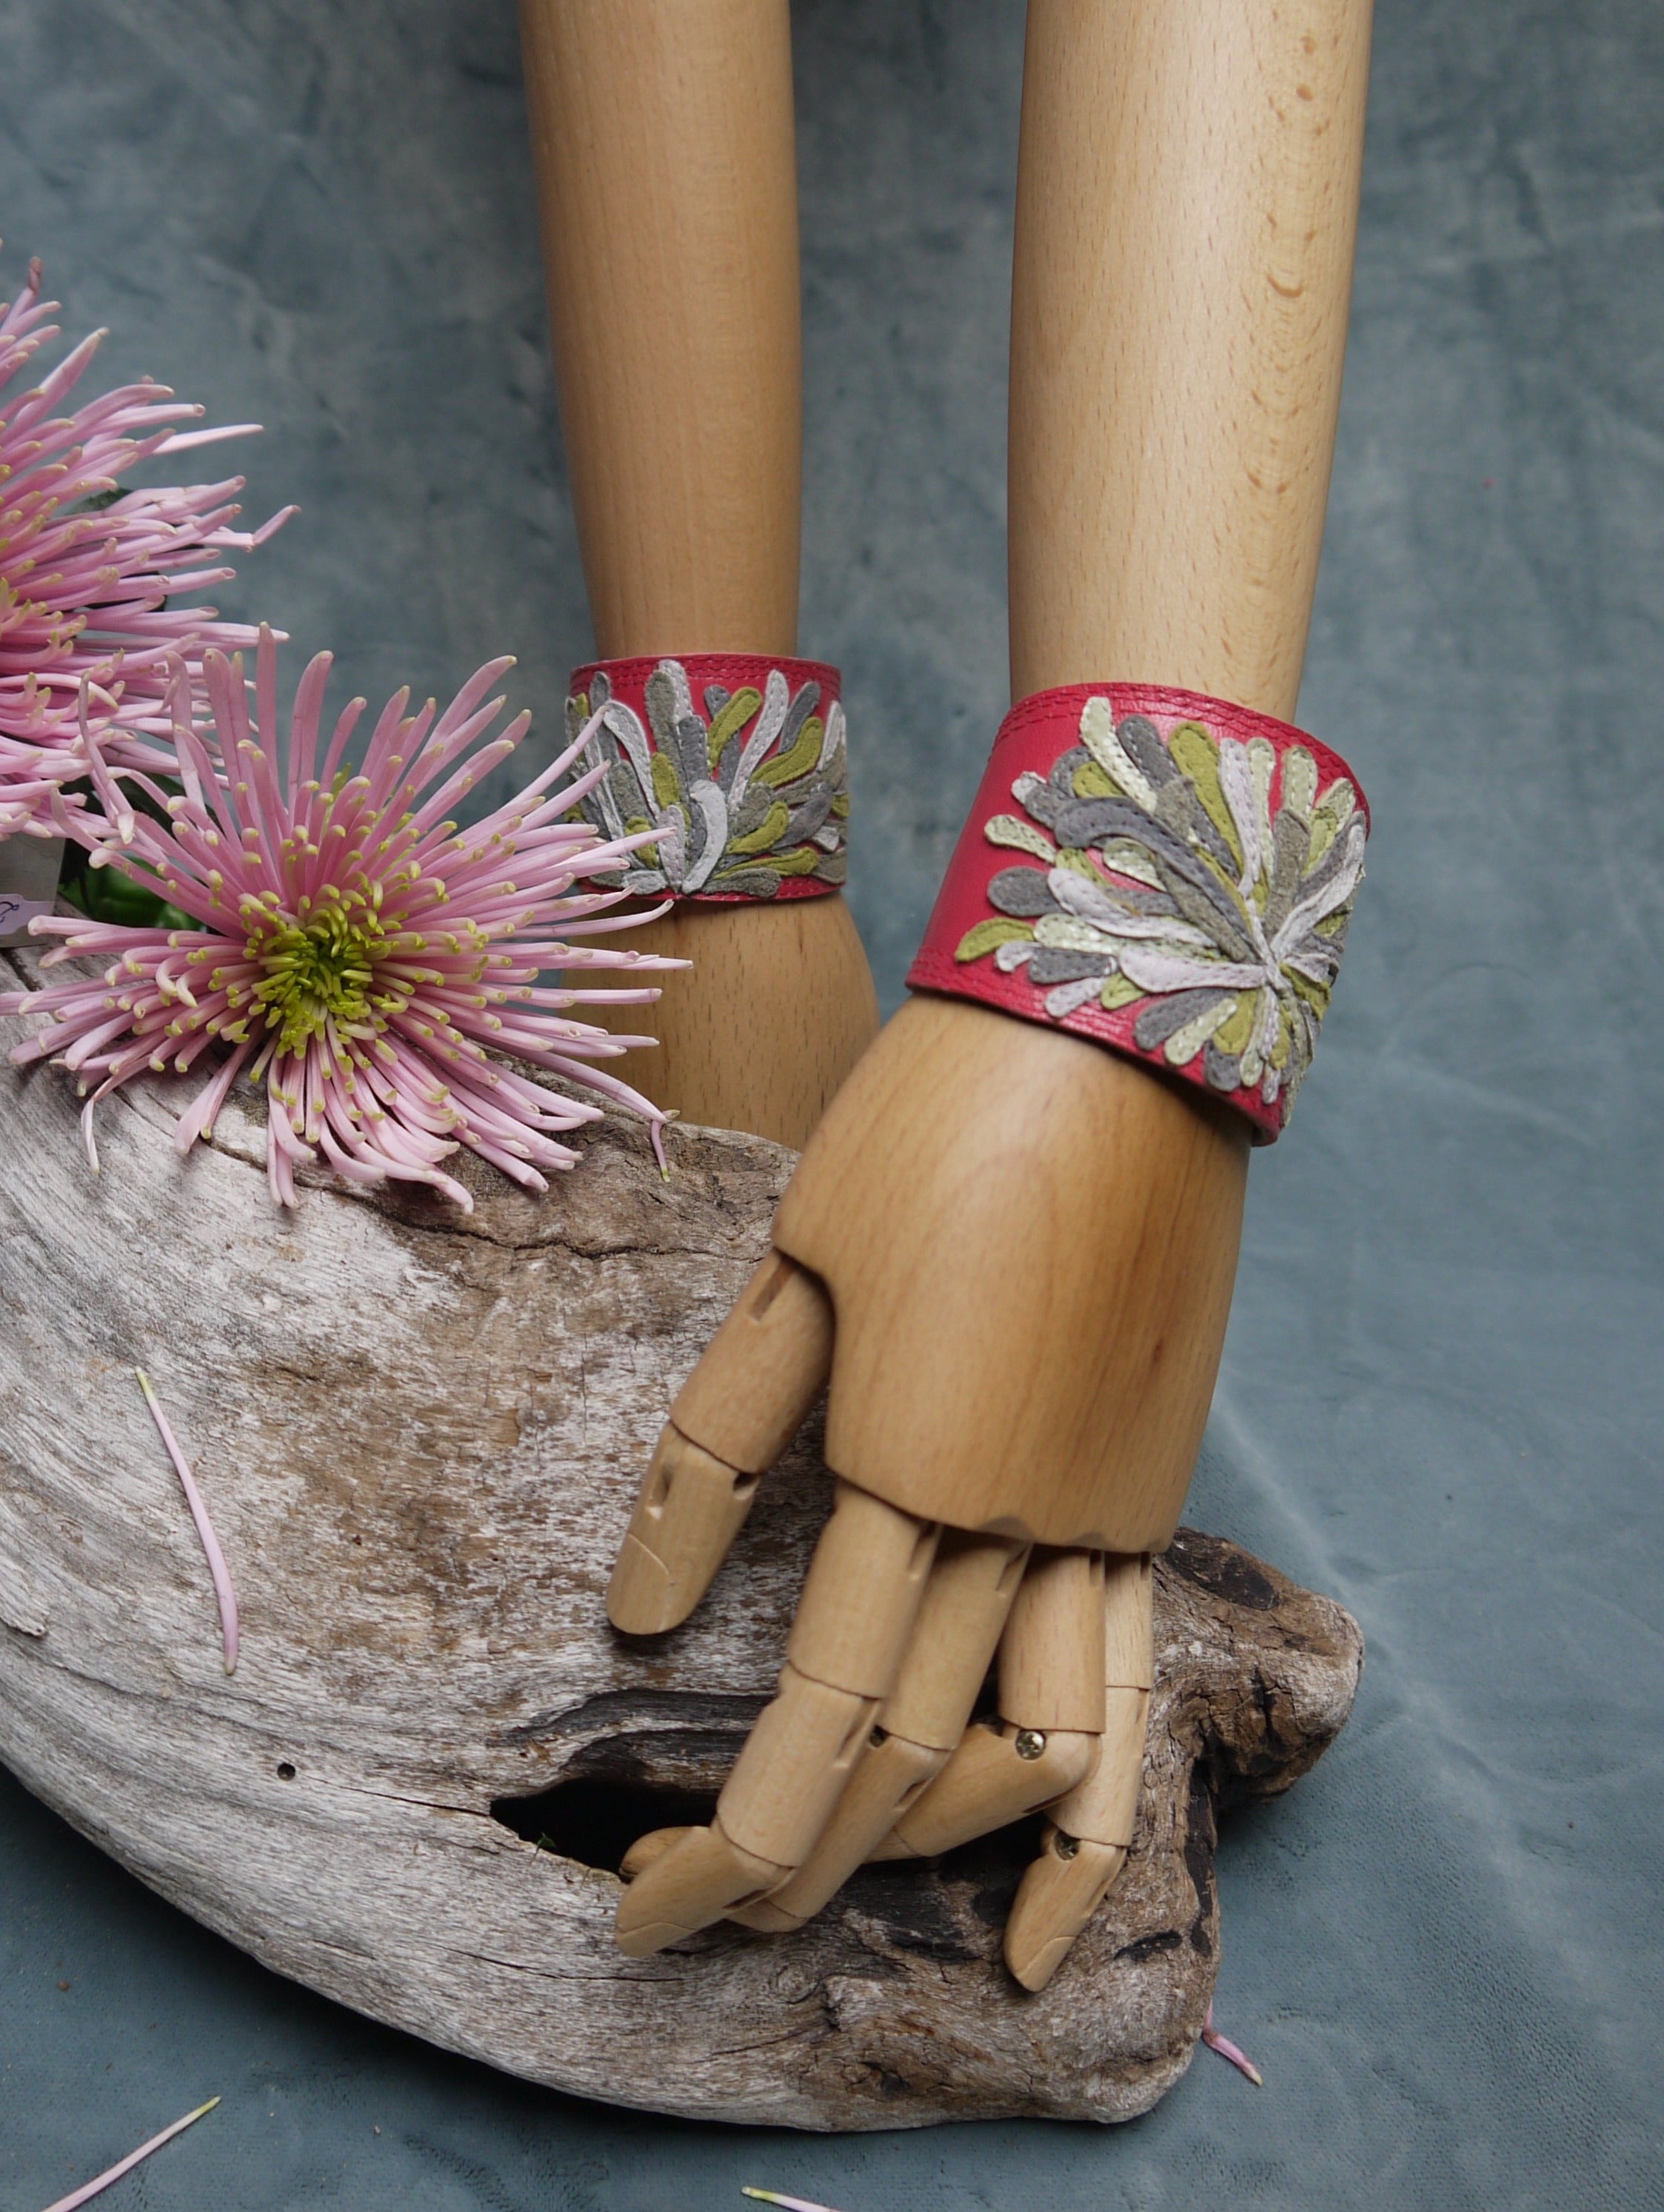 Chysanthemum Leather Cuff in hot pink with hand cut petals in  pale grey, white, green petals , one-of-a- kind, unique, made in Italy by designer-makers